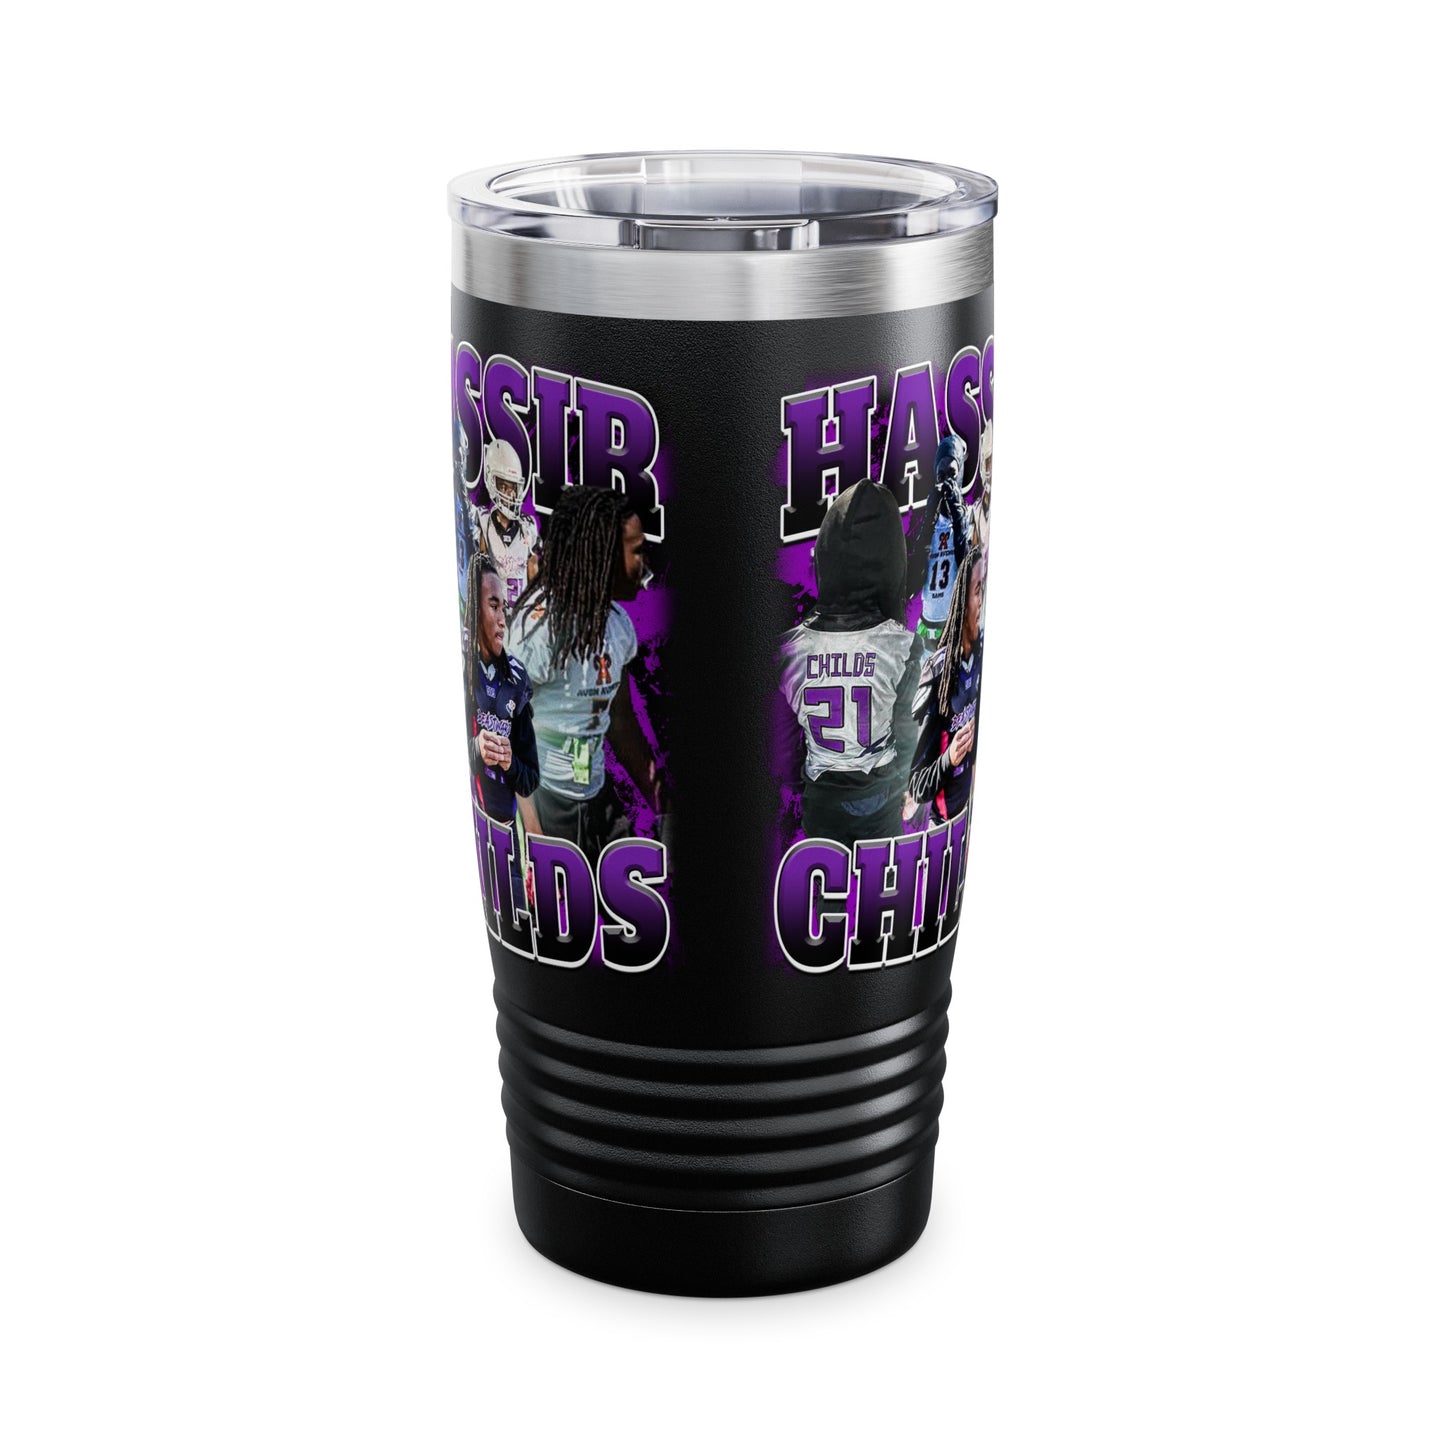 Hassir Childs Stainless Steal Tumbler